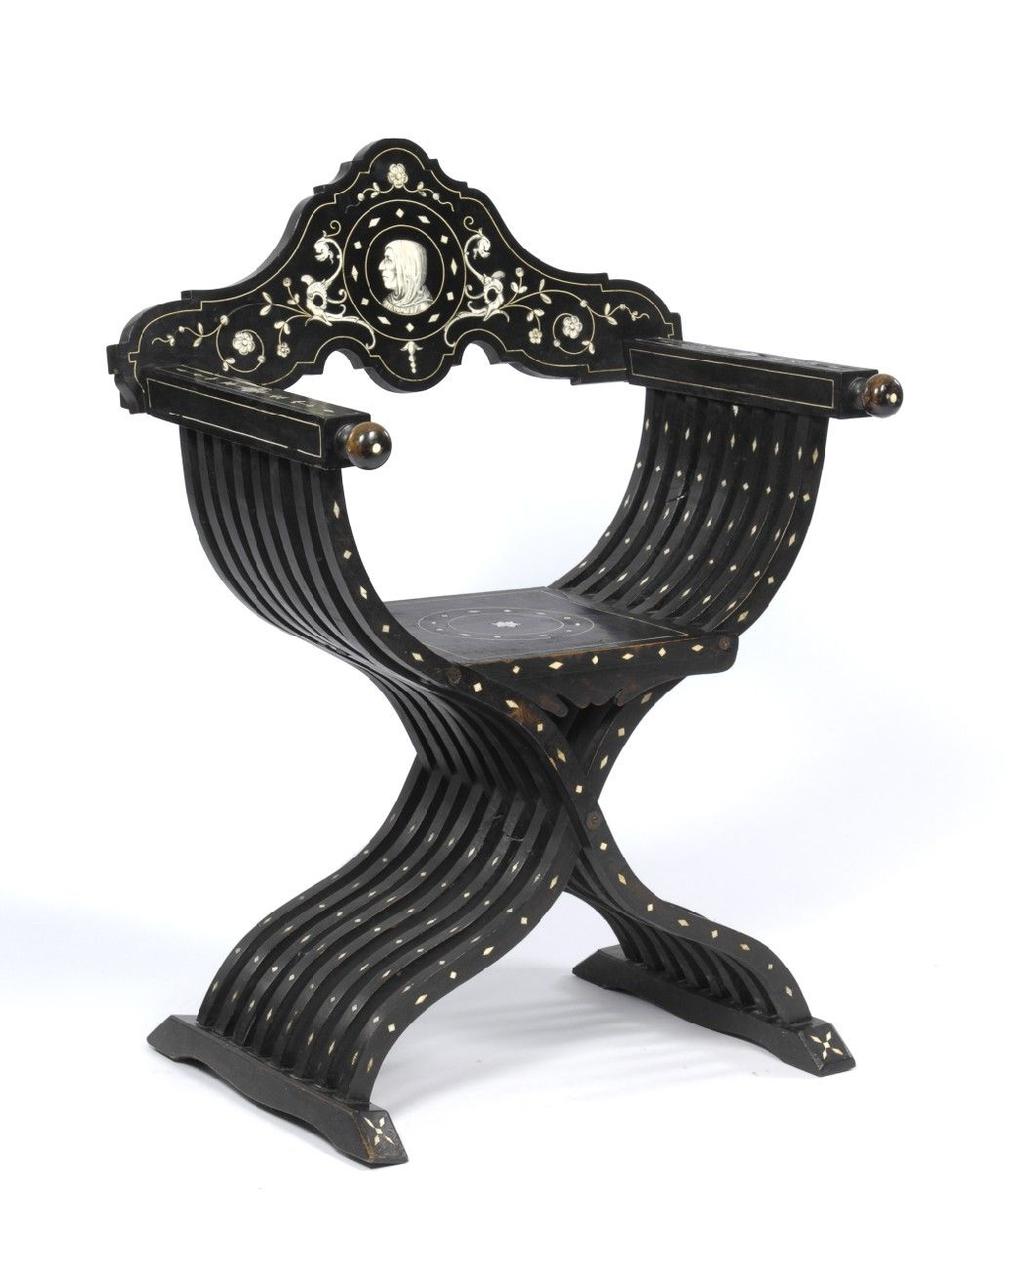 Chairs In Renaissance, the social role of chairs changes in comparison to the Middle Ages.